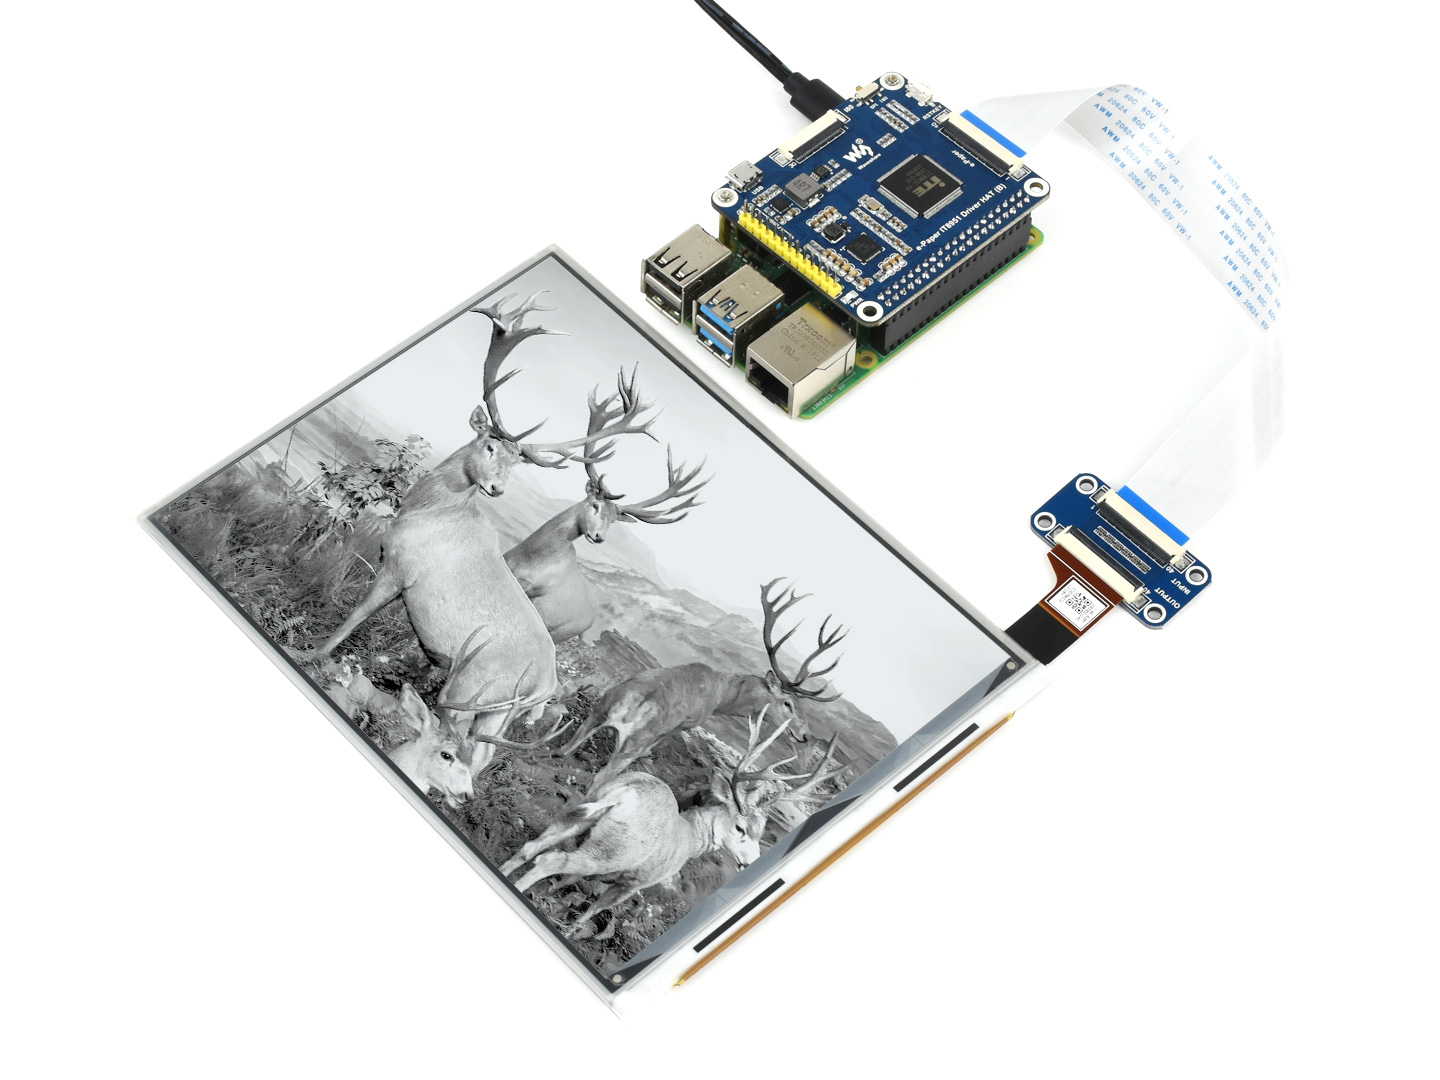 1872*1404, 7.8inch E-Ink display HAT for Raspberry Pi